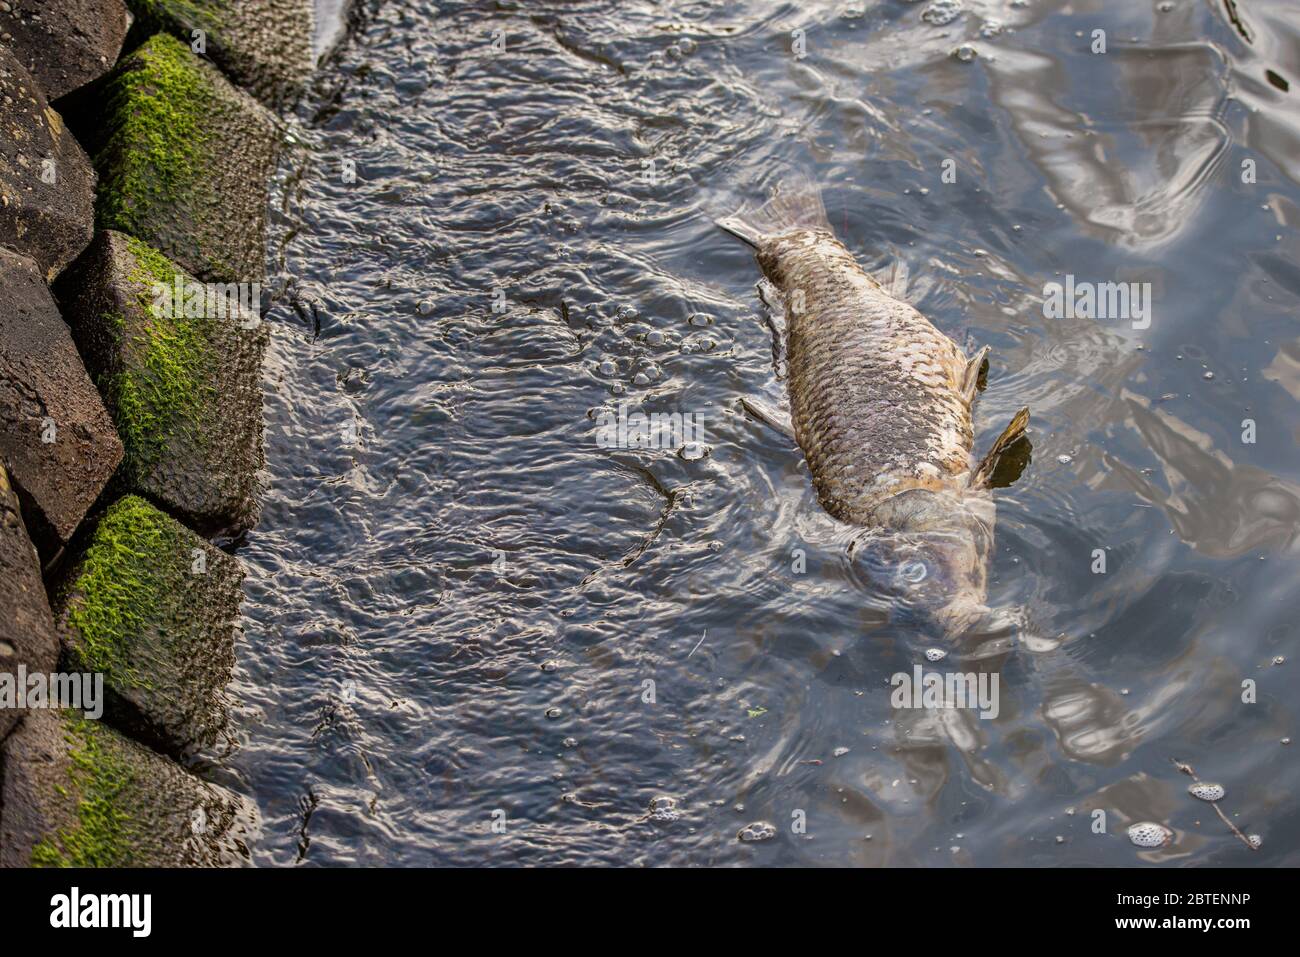 A dead fish floating along the side of the river in Amsterdam, the Netherlands Stock Photo